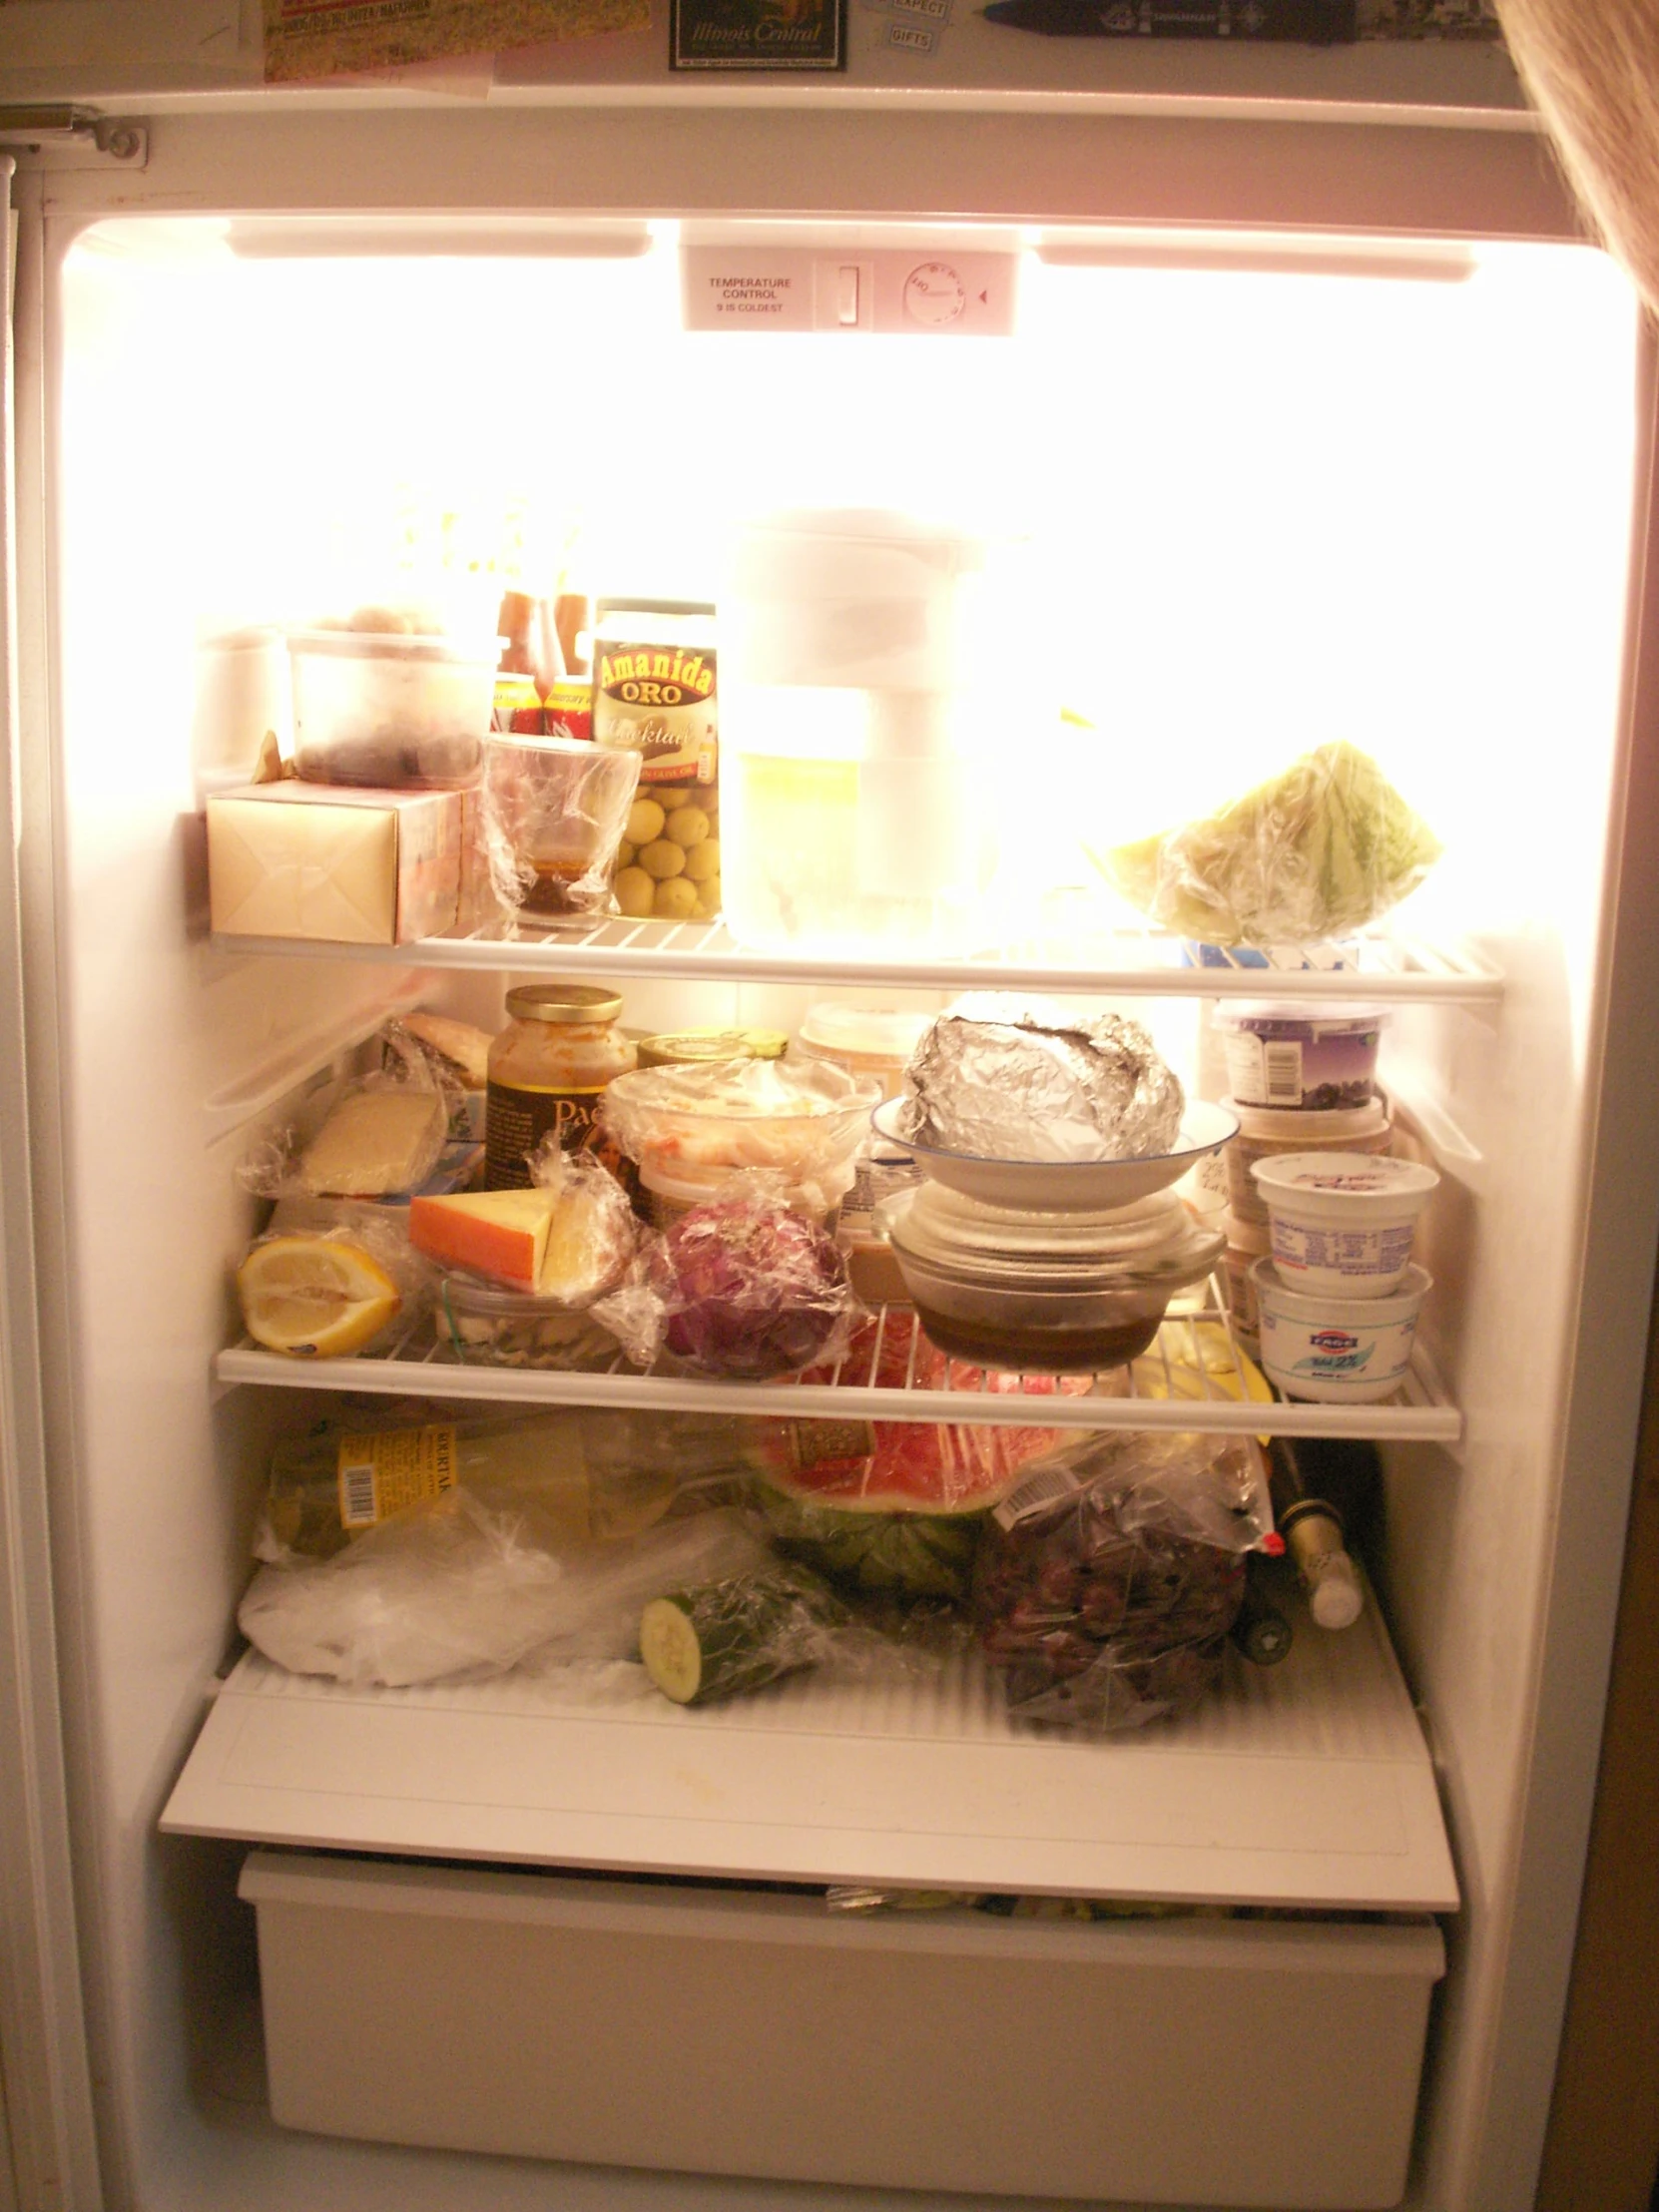 a white refrigerator filled with food and drinks